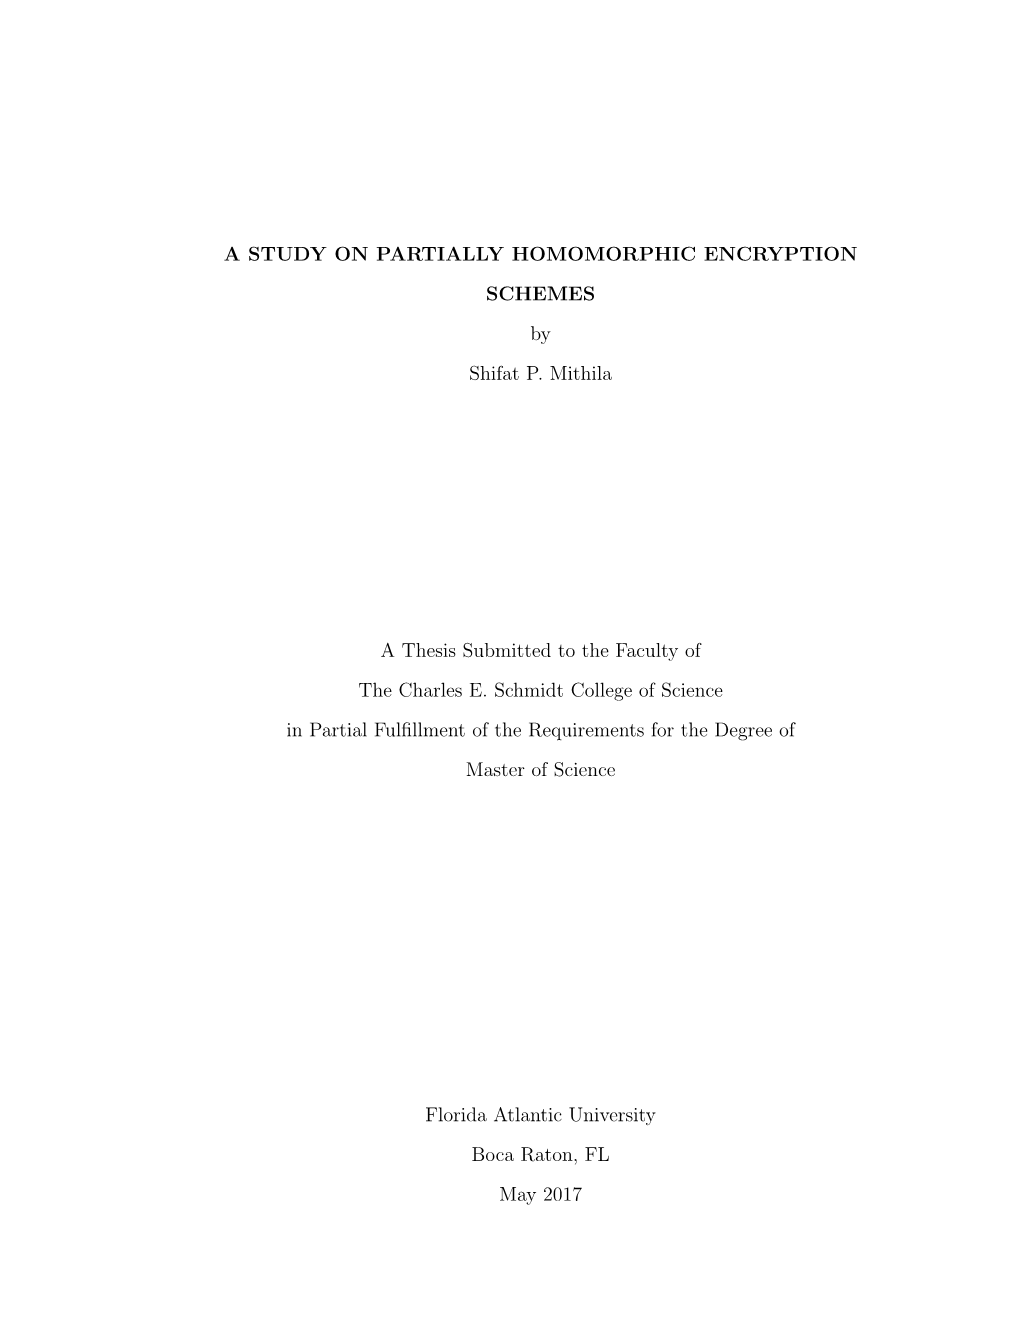 Thesis Submitted to the Faculty of the Charles E